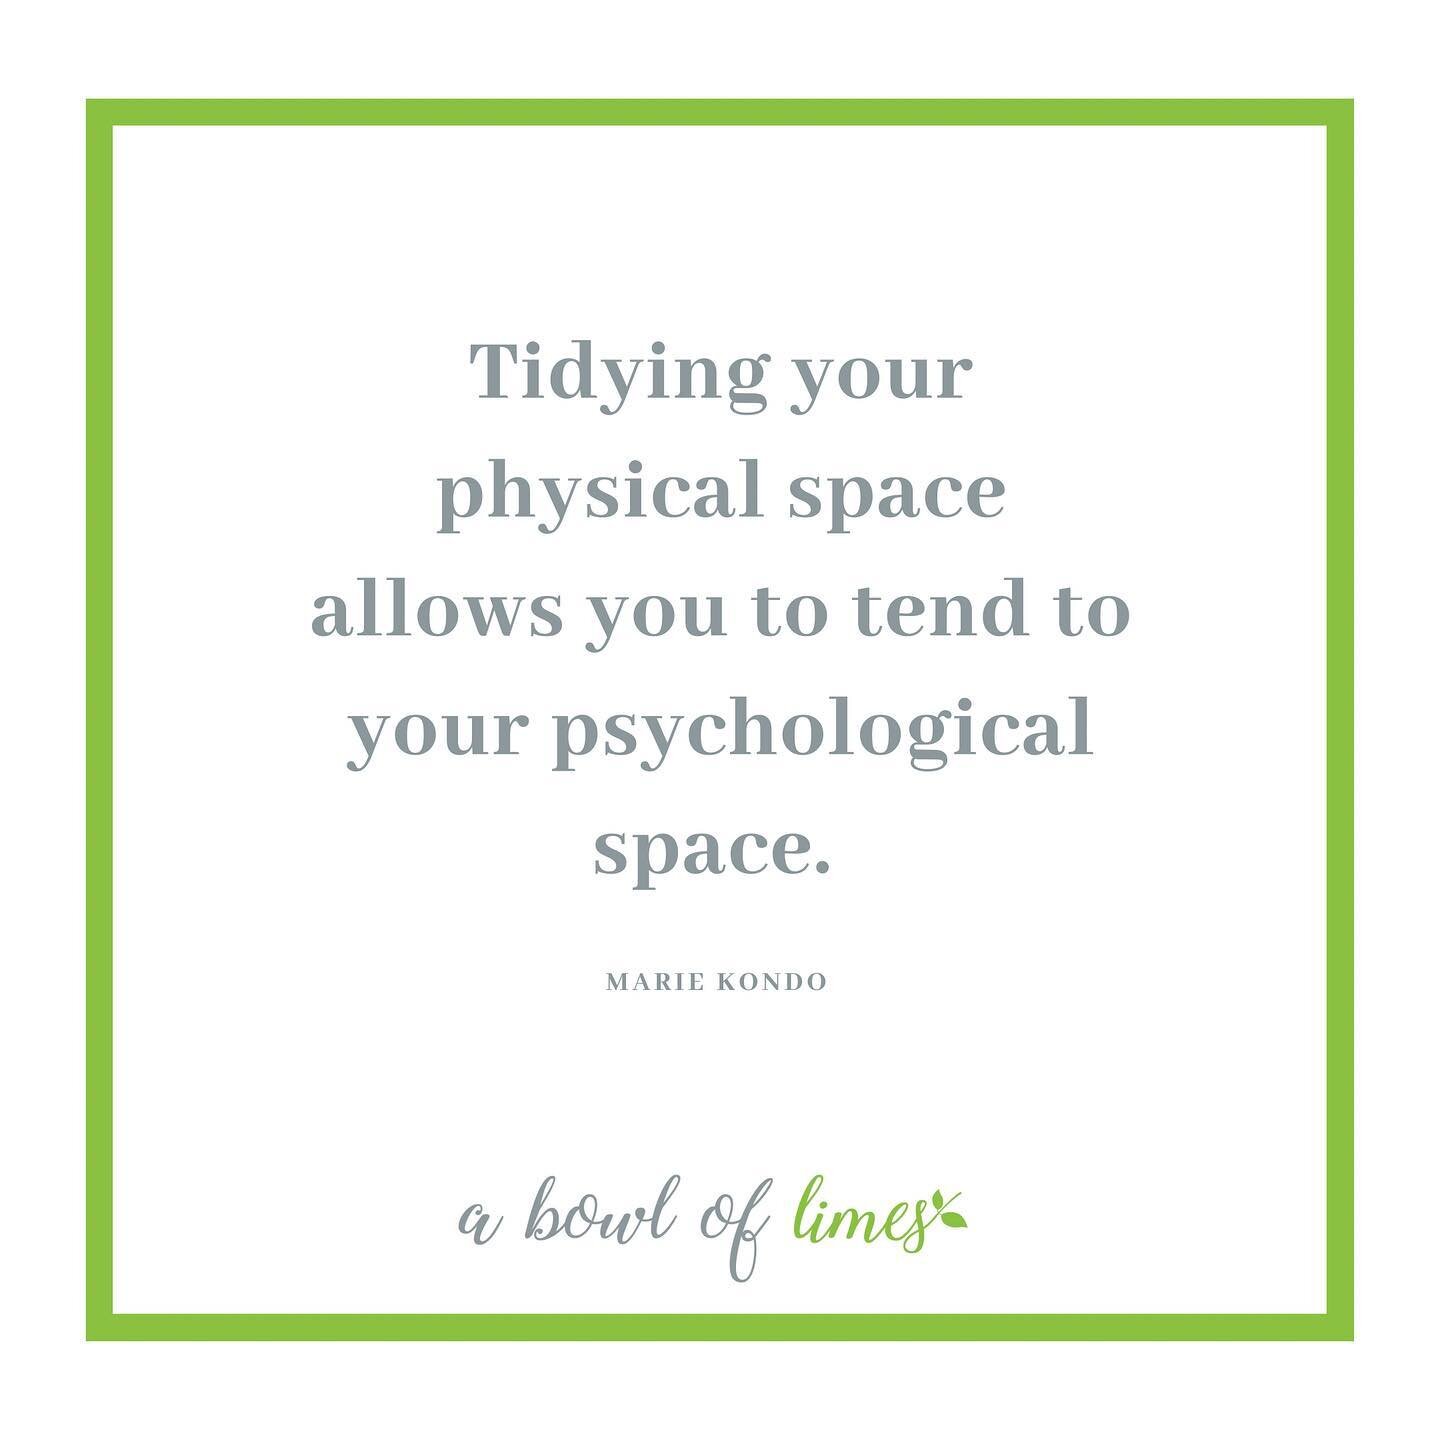 When you change the energy in your physical space, it shifts the energy in your mental space. The two are inextricably linked.

As a certified KonMari Consultant, I work with clients to guide &amp; support them as they gain back control of their surr